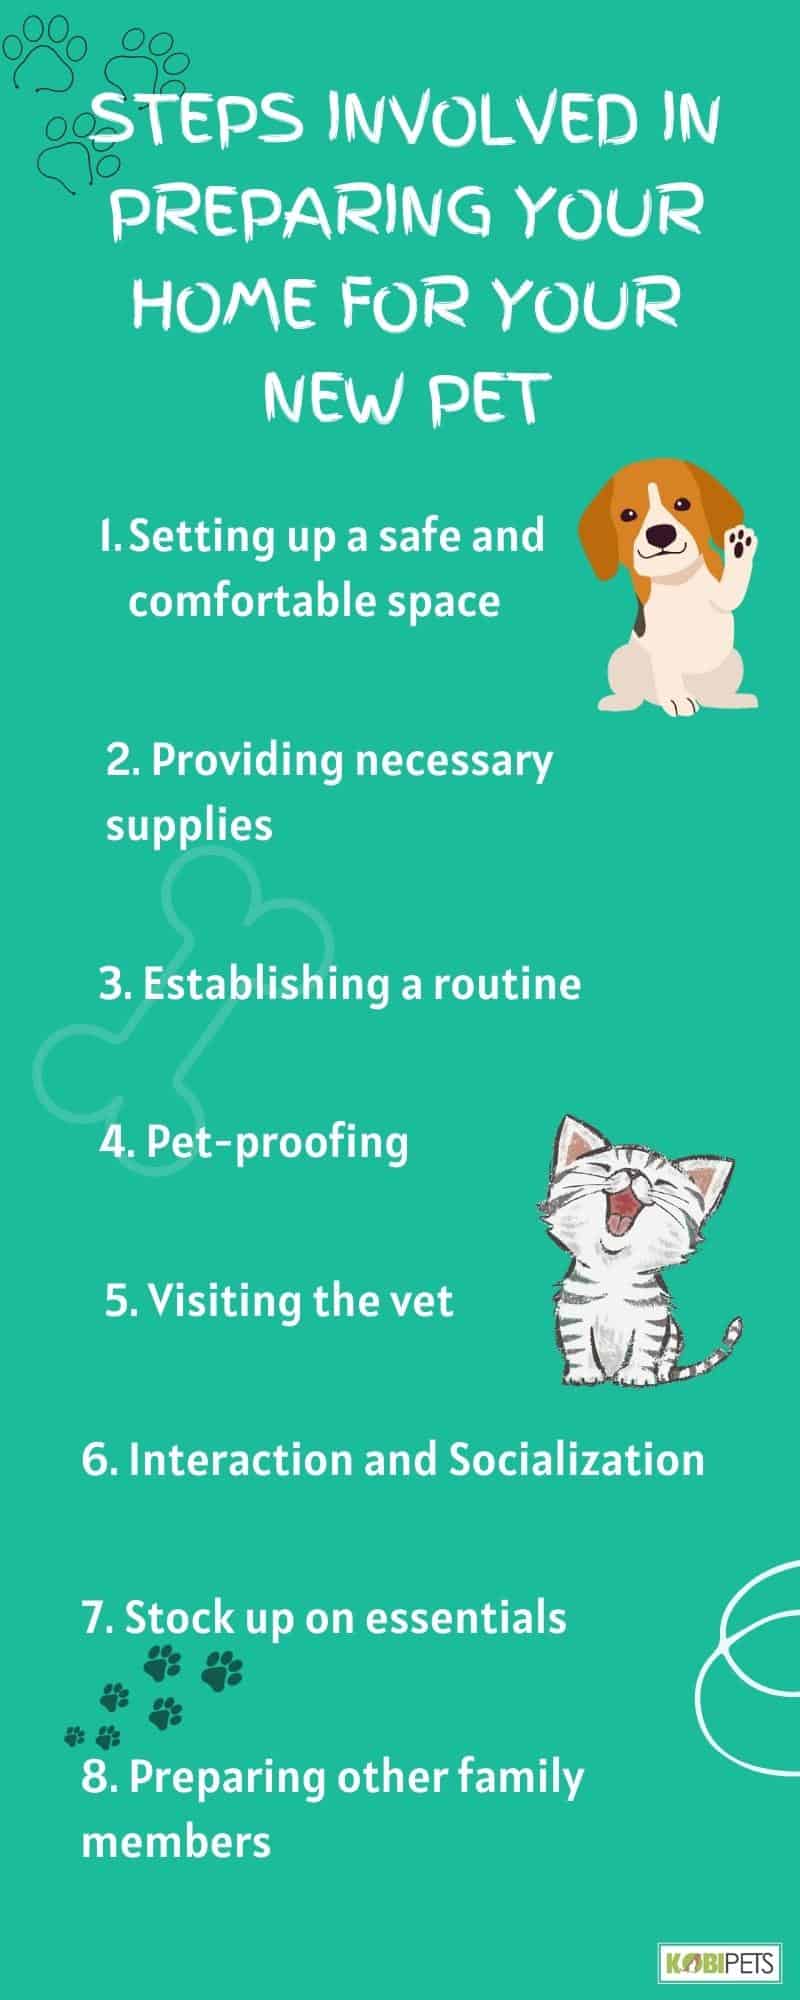 Steps Involved in Preparing Your Home for Your New Pet